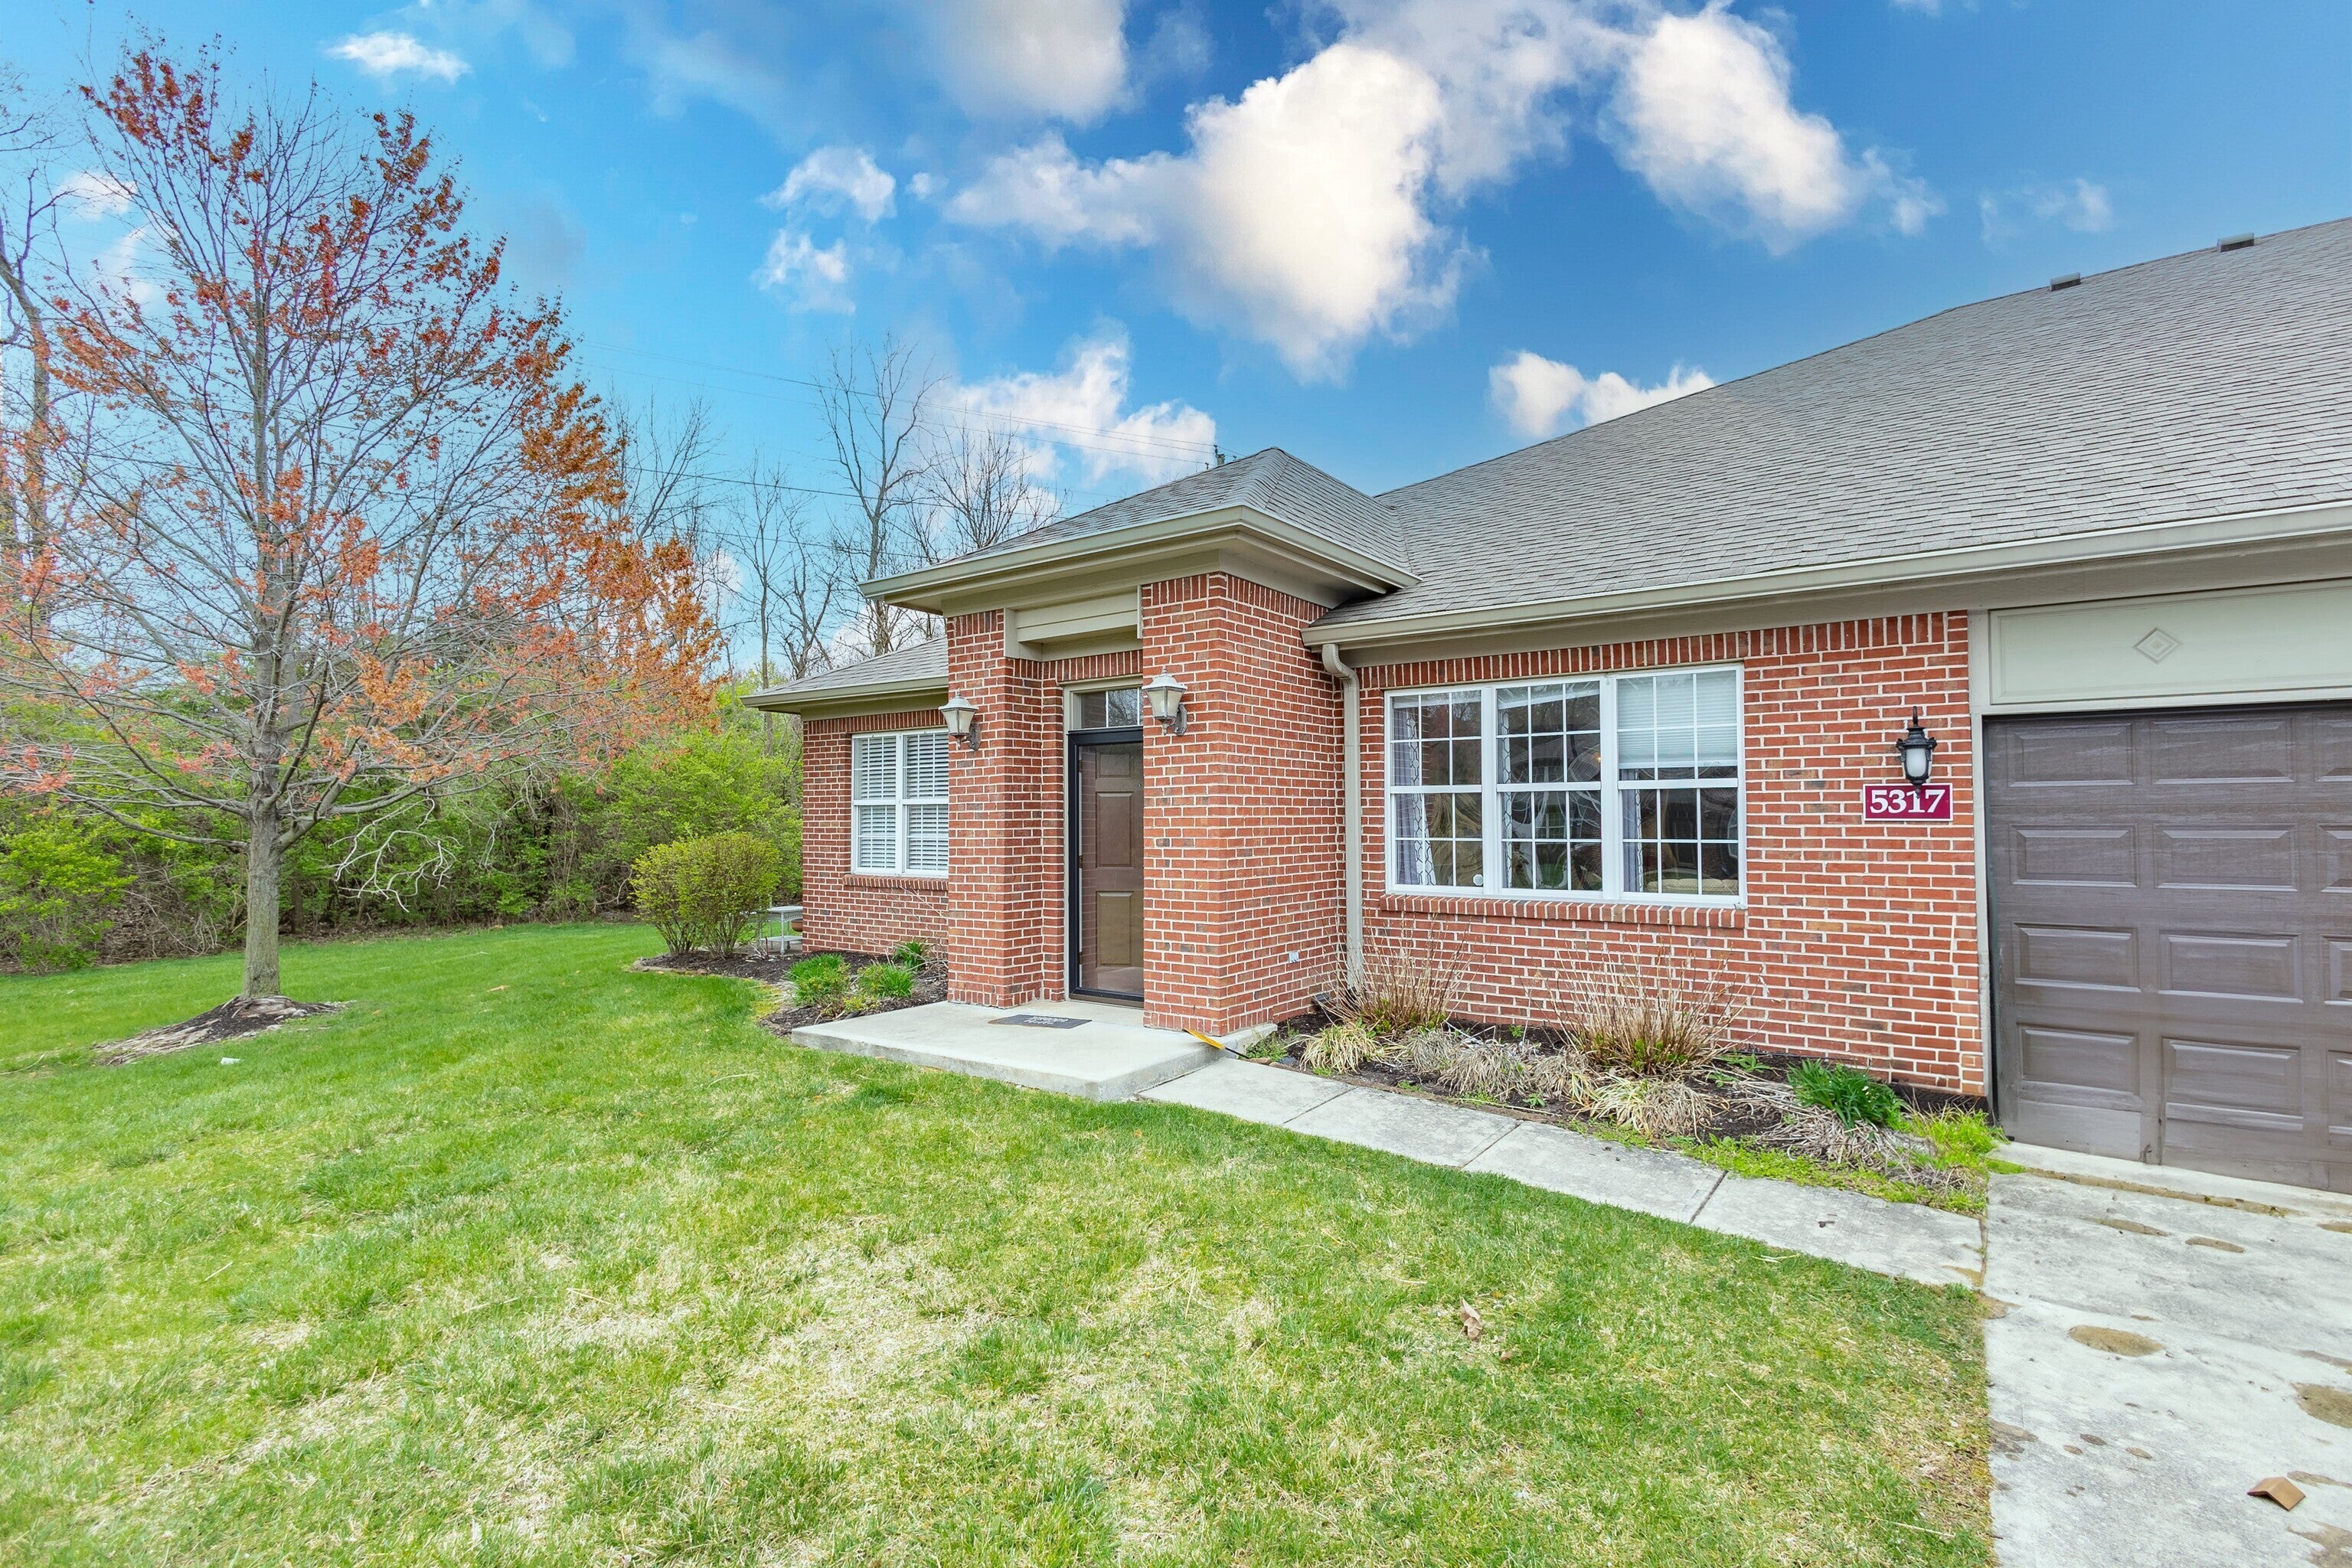 5317 Ladywood Knoll Place, Indianapolis